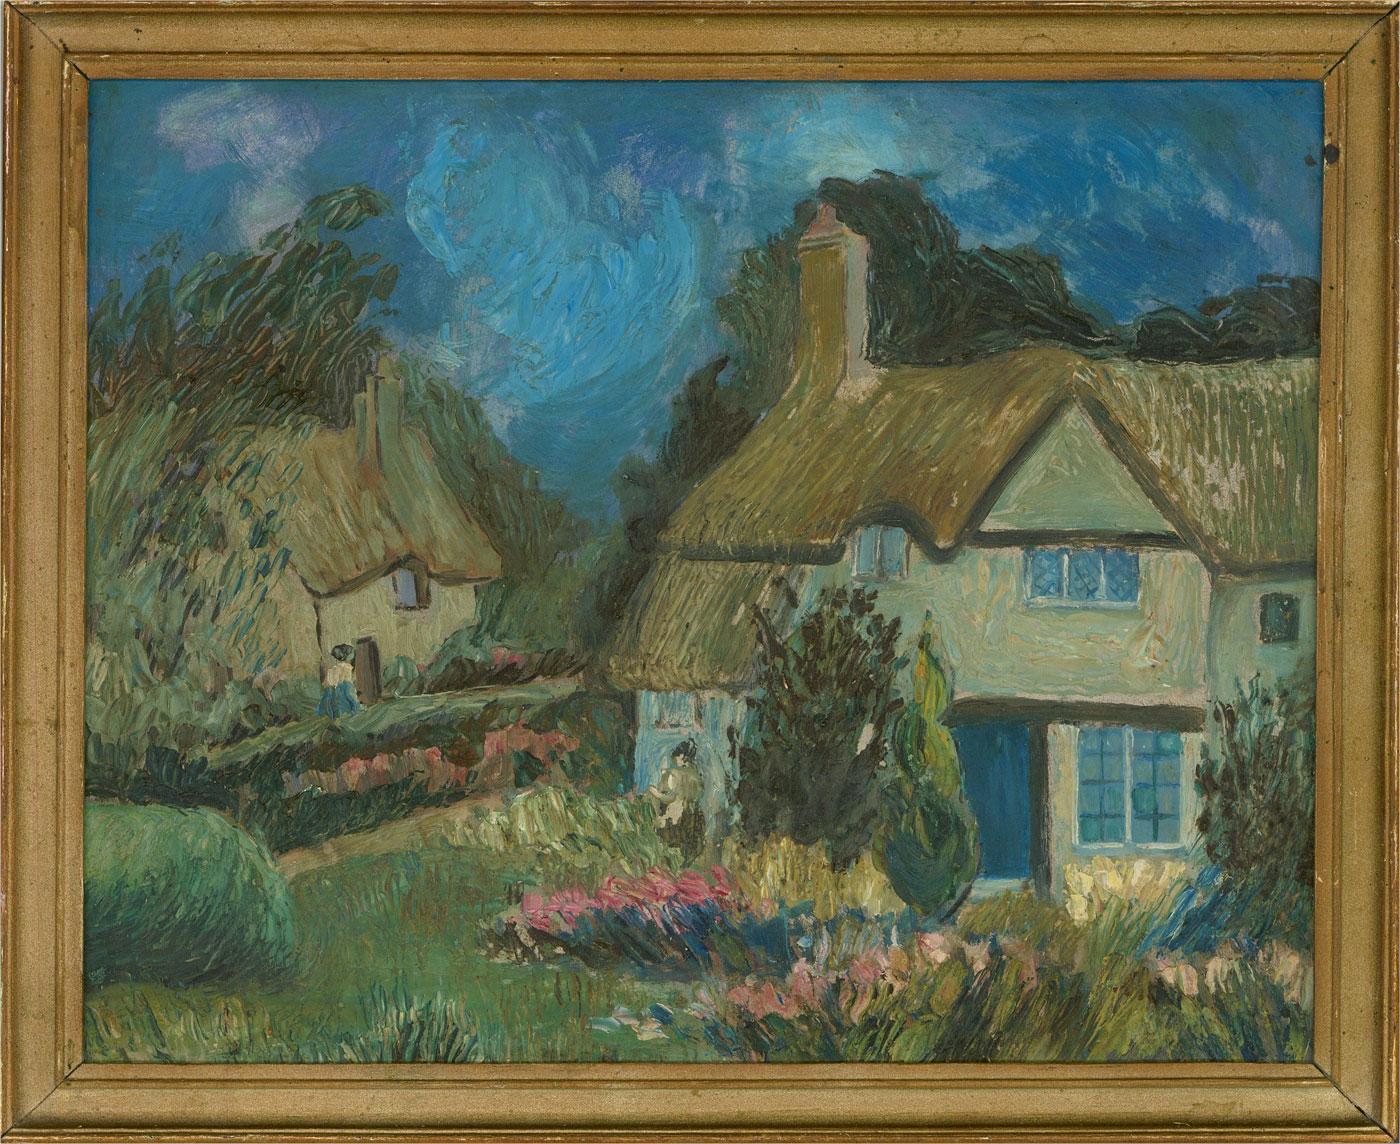 Unknown Landscape Painting - Mid 20th Century Oil - Blue Skies and Thatched Cottages